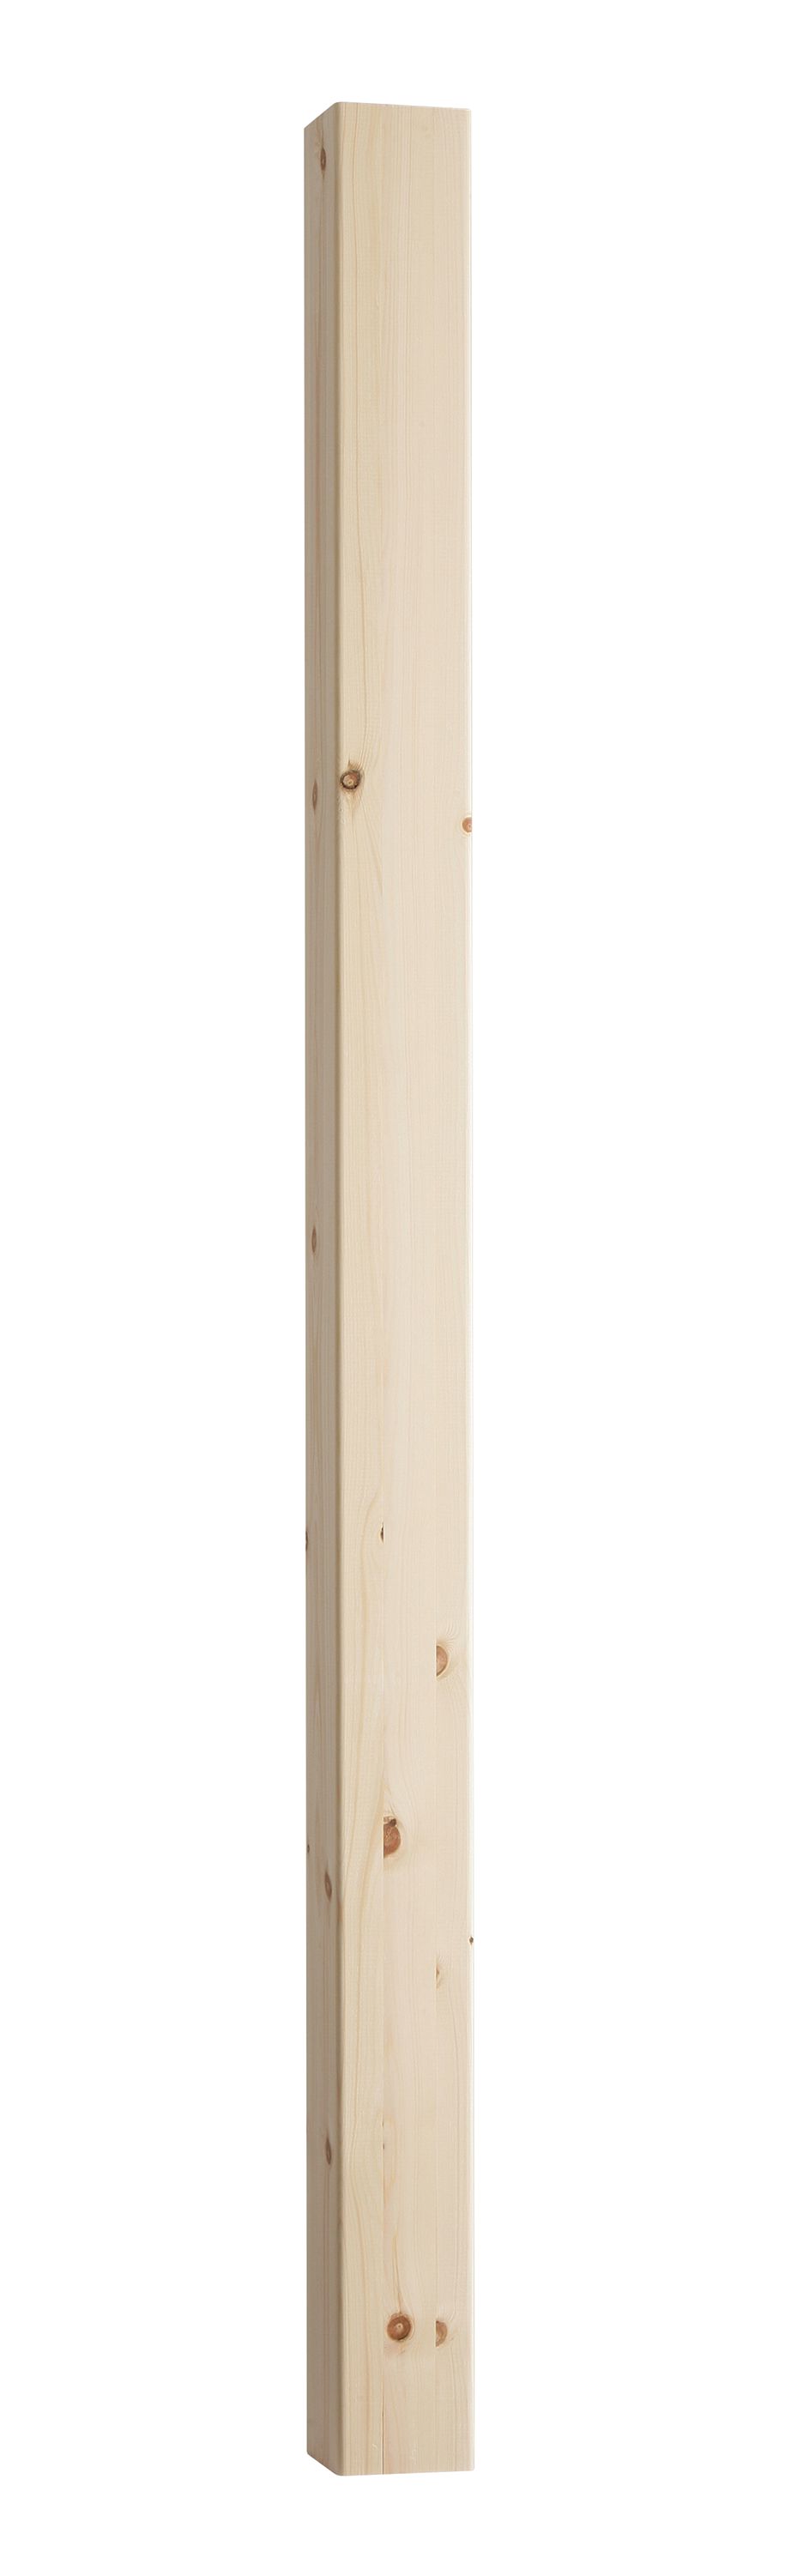 Image of Wickes Pine Chamfered Newel 1500 x 90 x 90mm